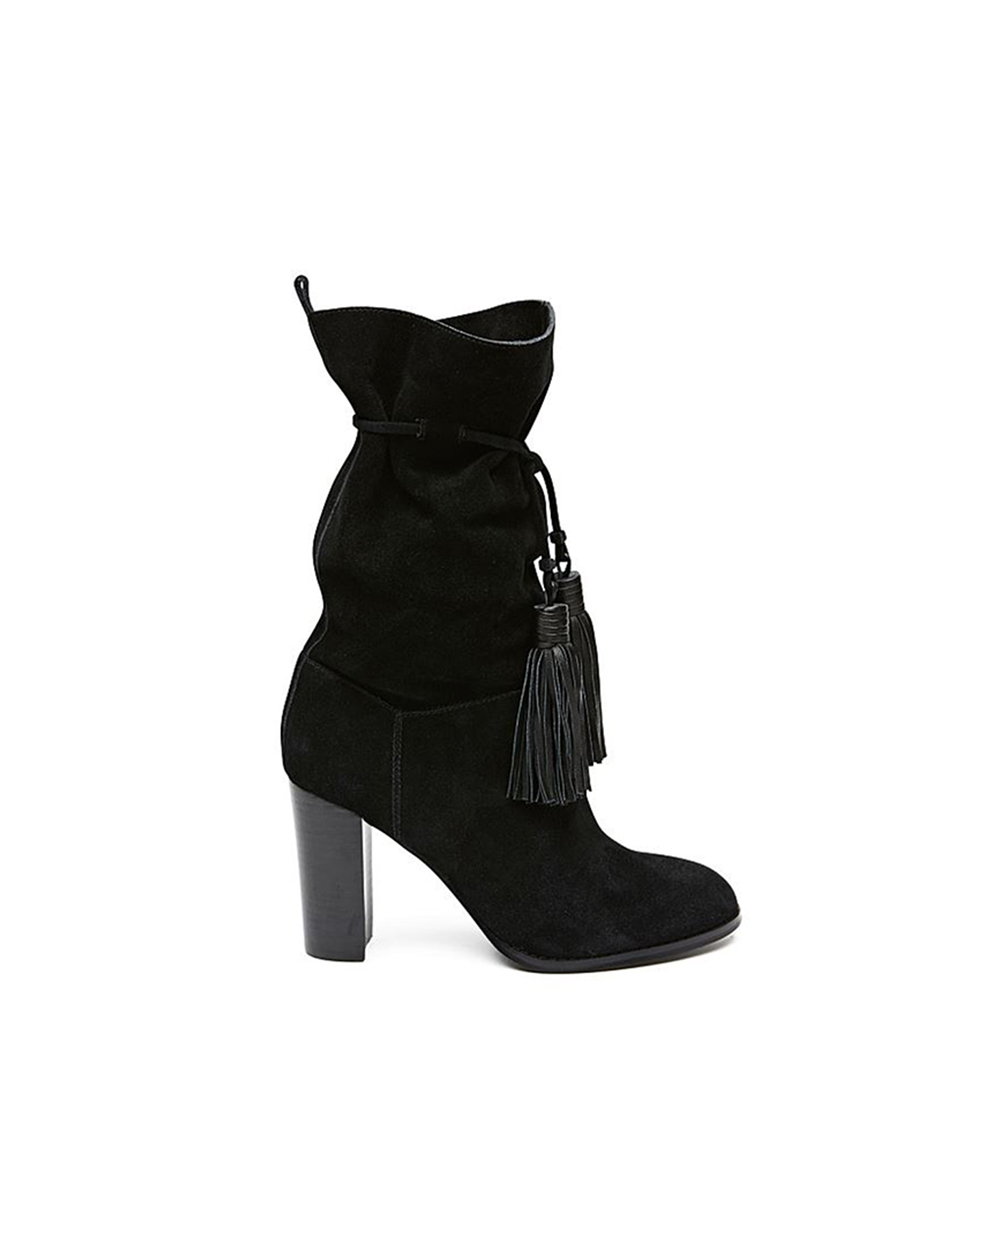 Quinn Tassel Boot, $299.90 from Witchery